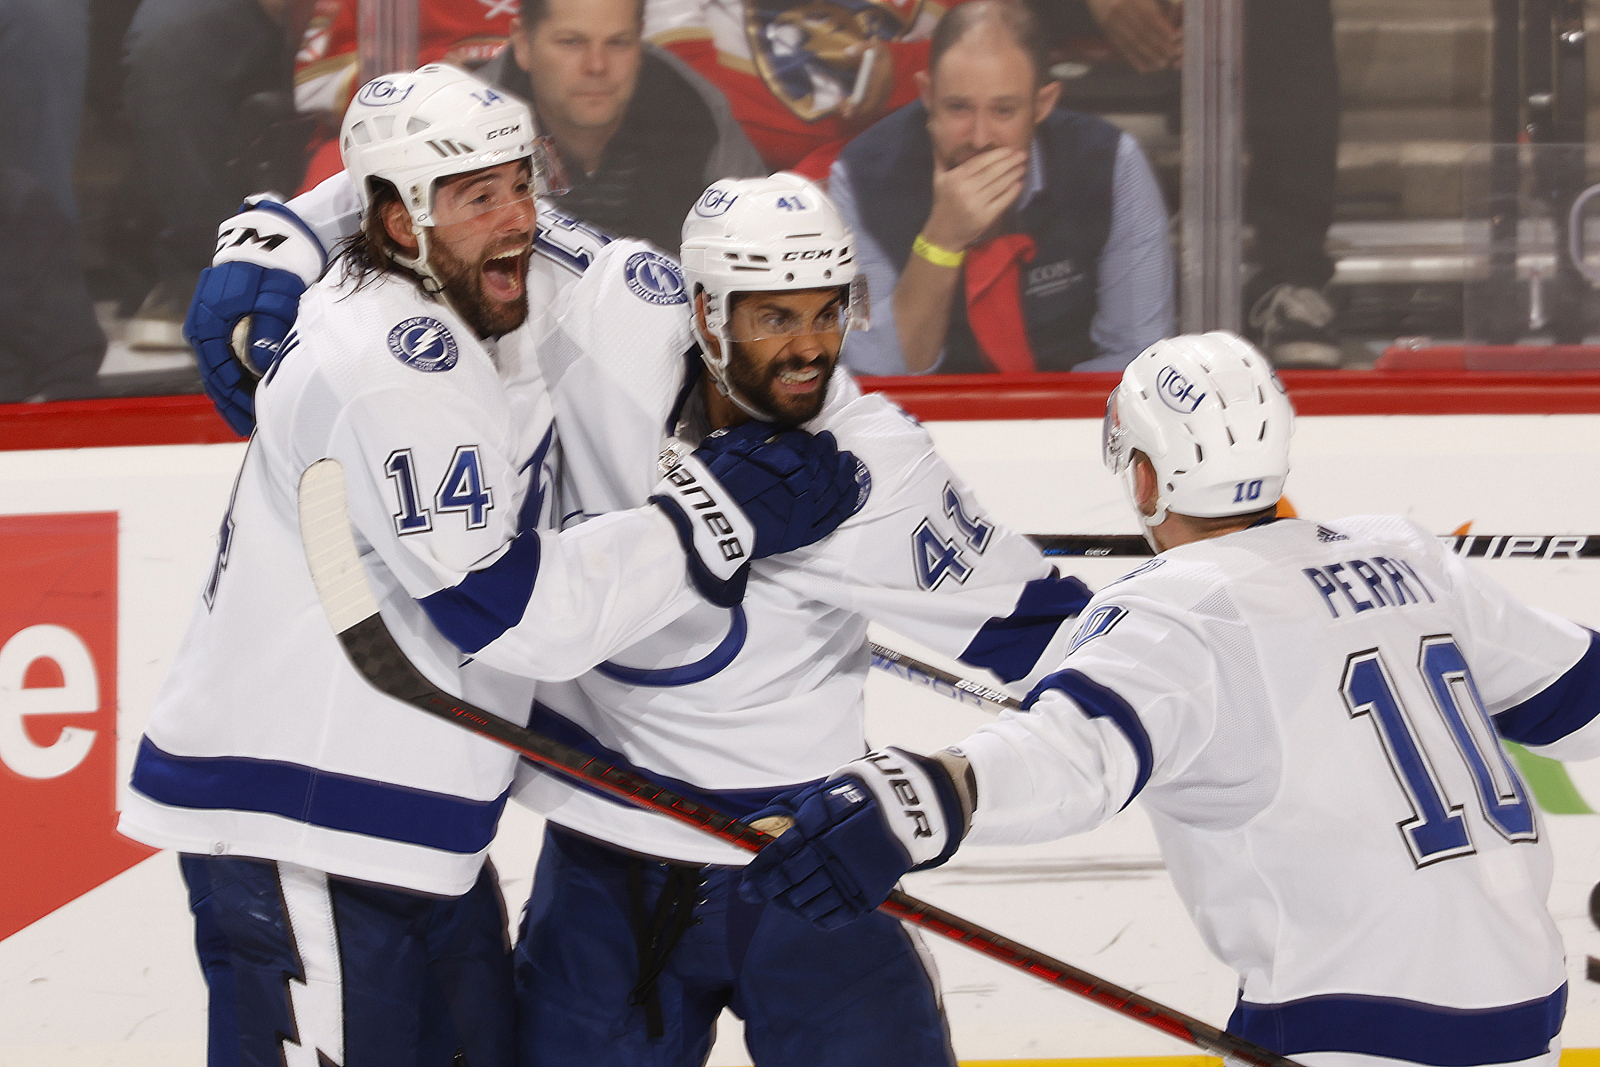 Pat Maroon, the 'Big Rig,' drives Lightning's gritty fourth line